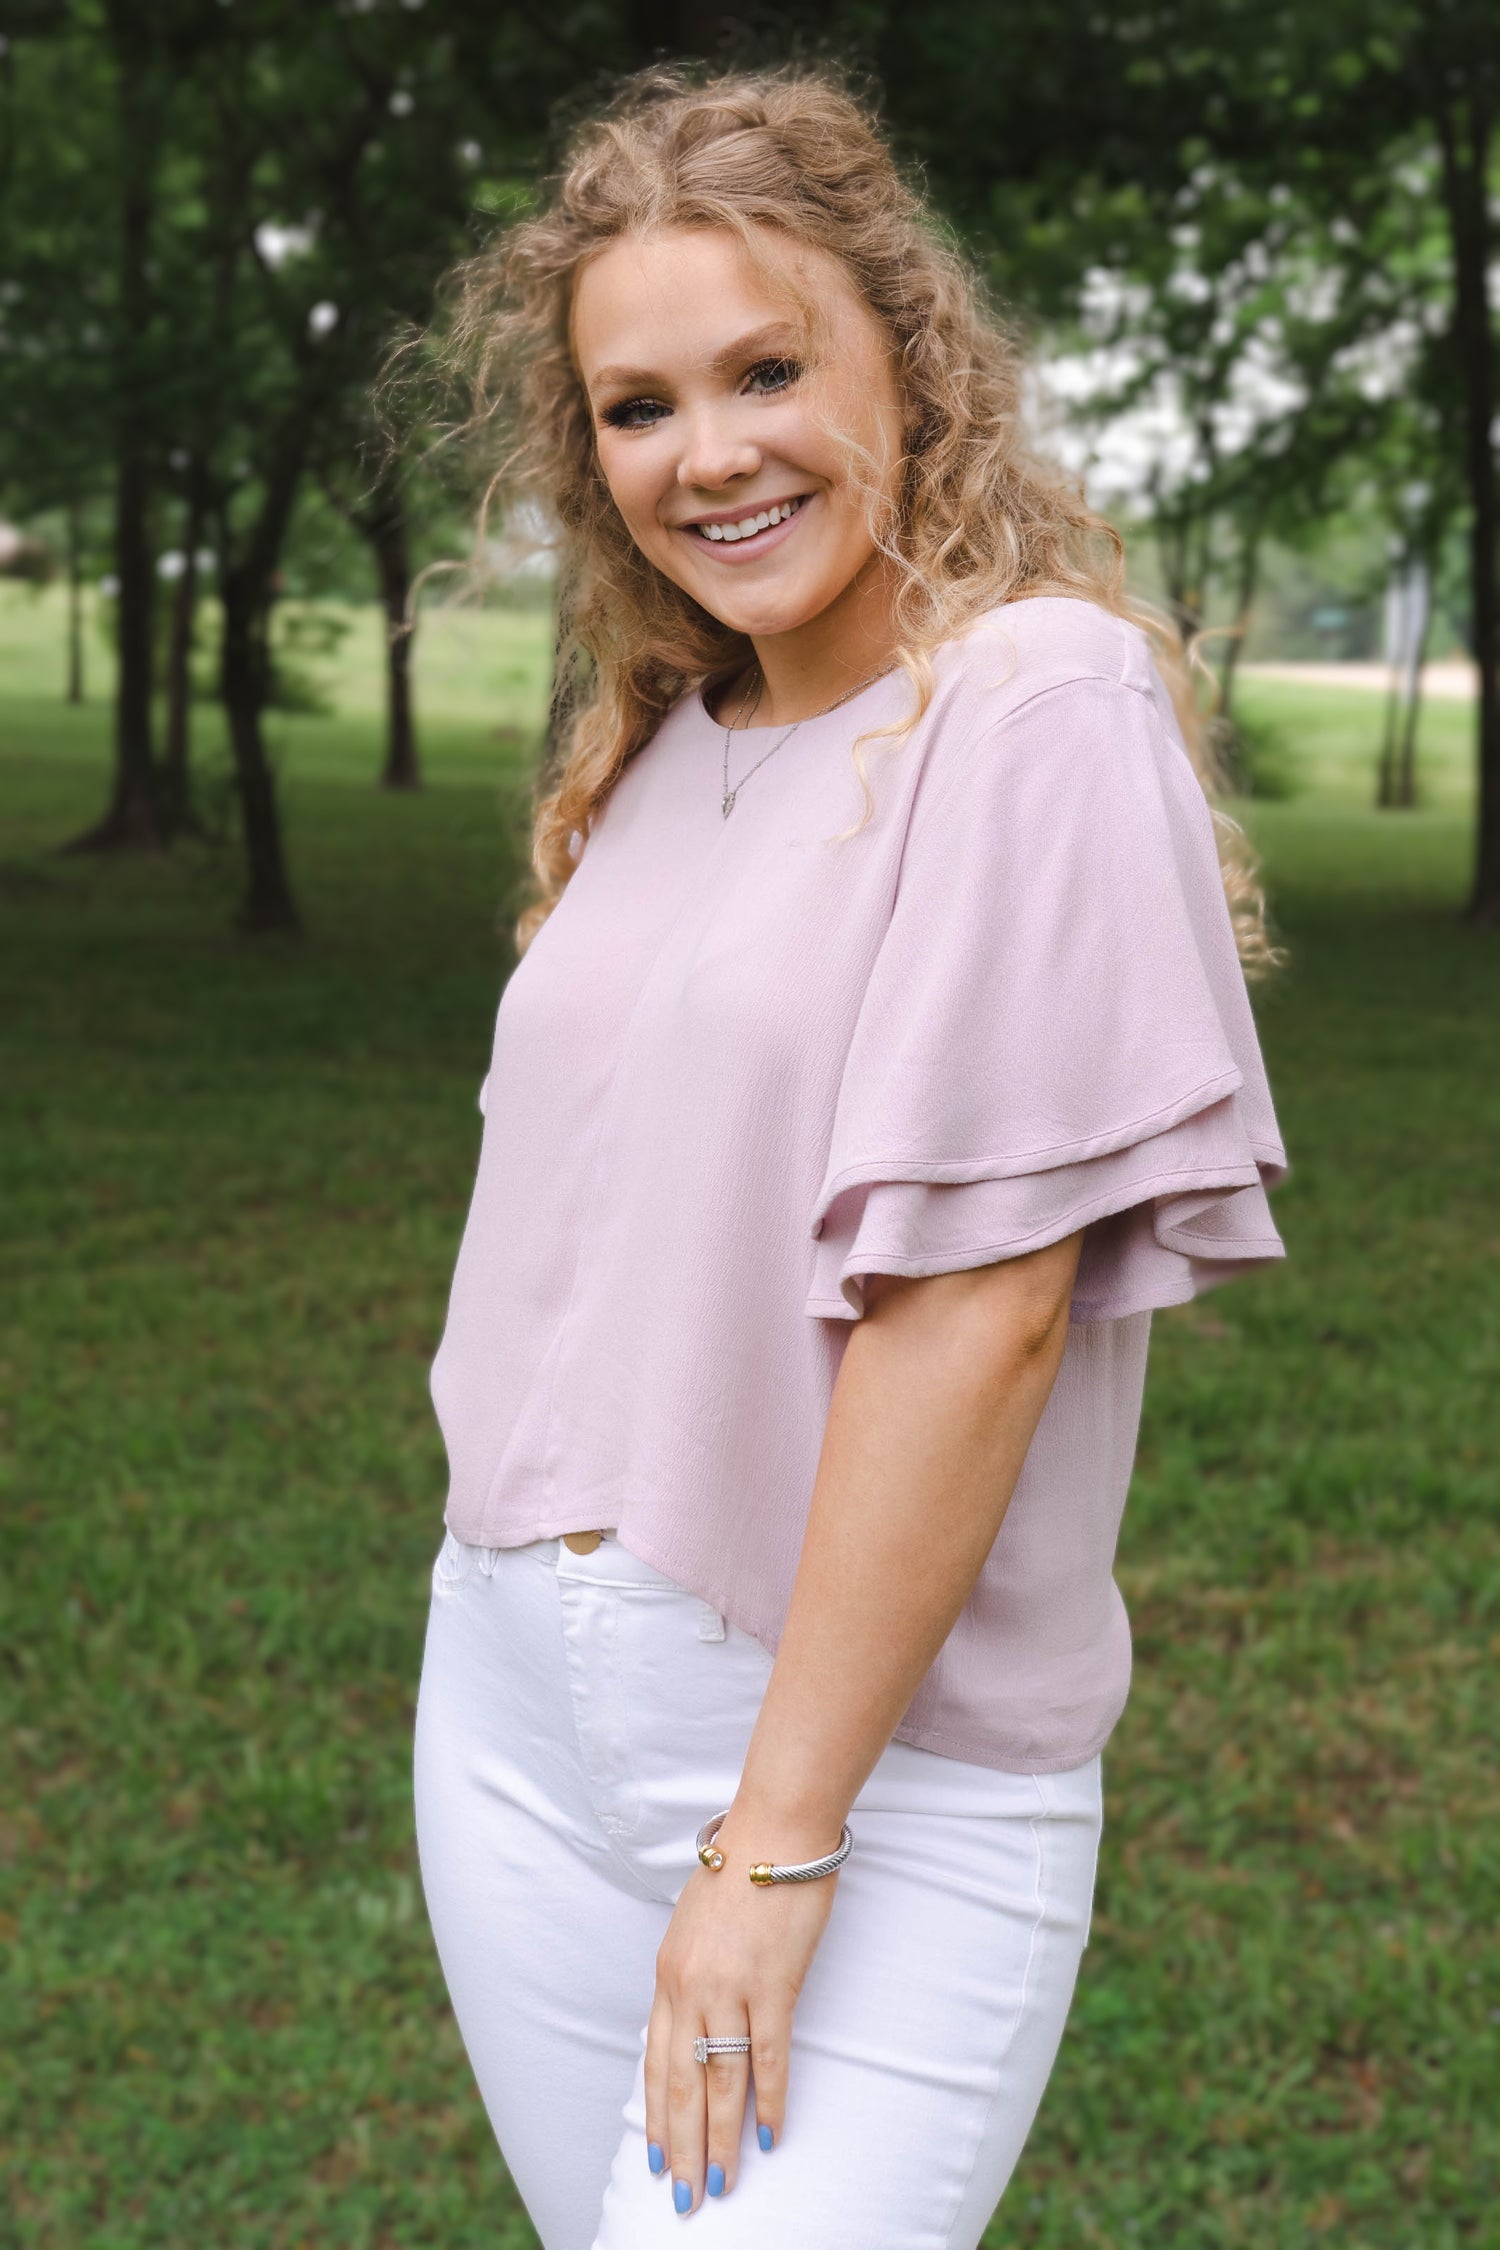 This image of a woman features the product Classic Flutter Top - Dusty Lavender. This top has a keyhole back and flowy double ruffle sleeves. It is a lovely dusty pink-purple color.